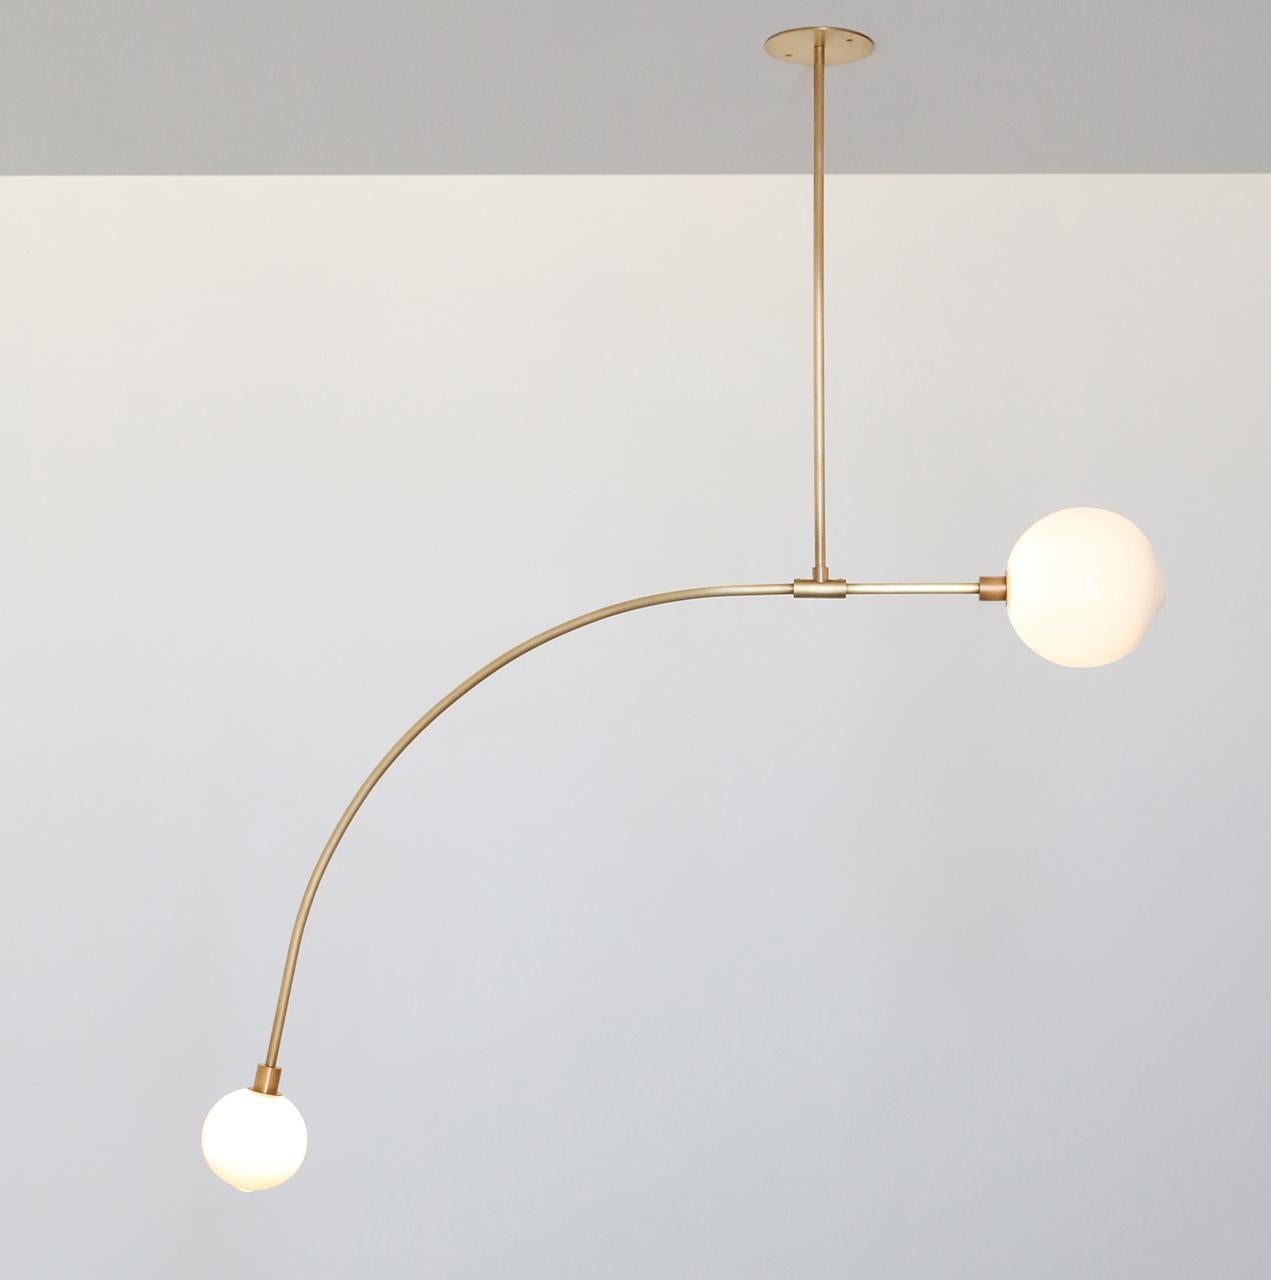 Brass Balance 1.0 pendant lamp by SkLO
Dimensions: D 114.5 x H 66.5 cm
Materials: white glass, brushed brass
Available in clear, new blue, olivin, smoke and white.
Available in 4 metal finishes: dark oxidized, brushed brass, polished nickel,